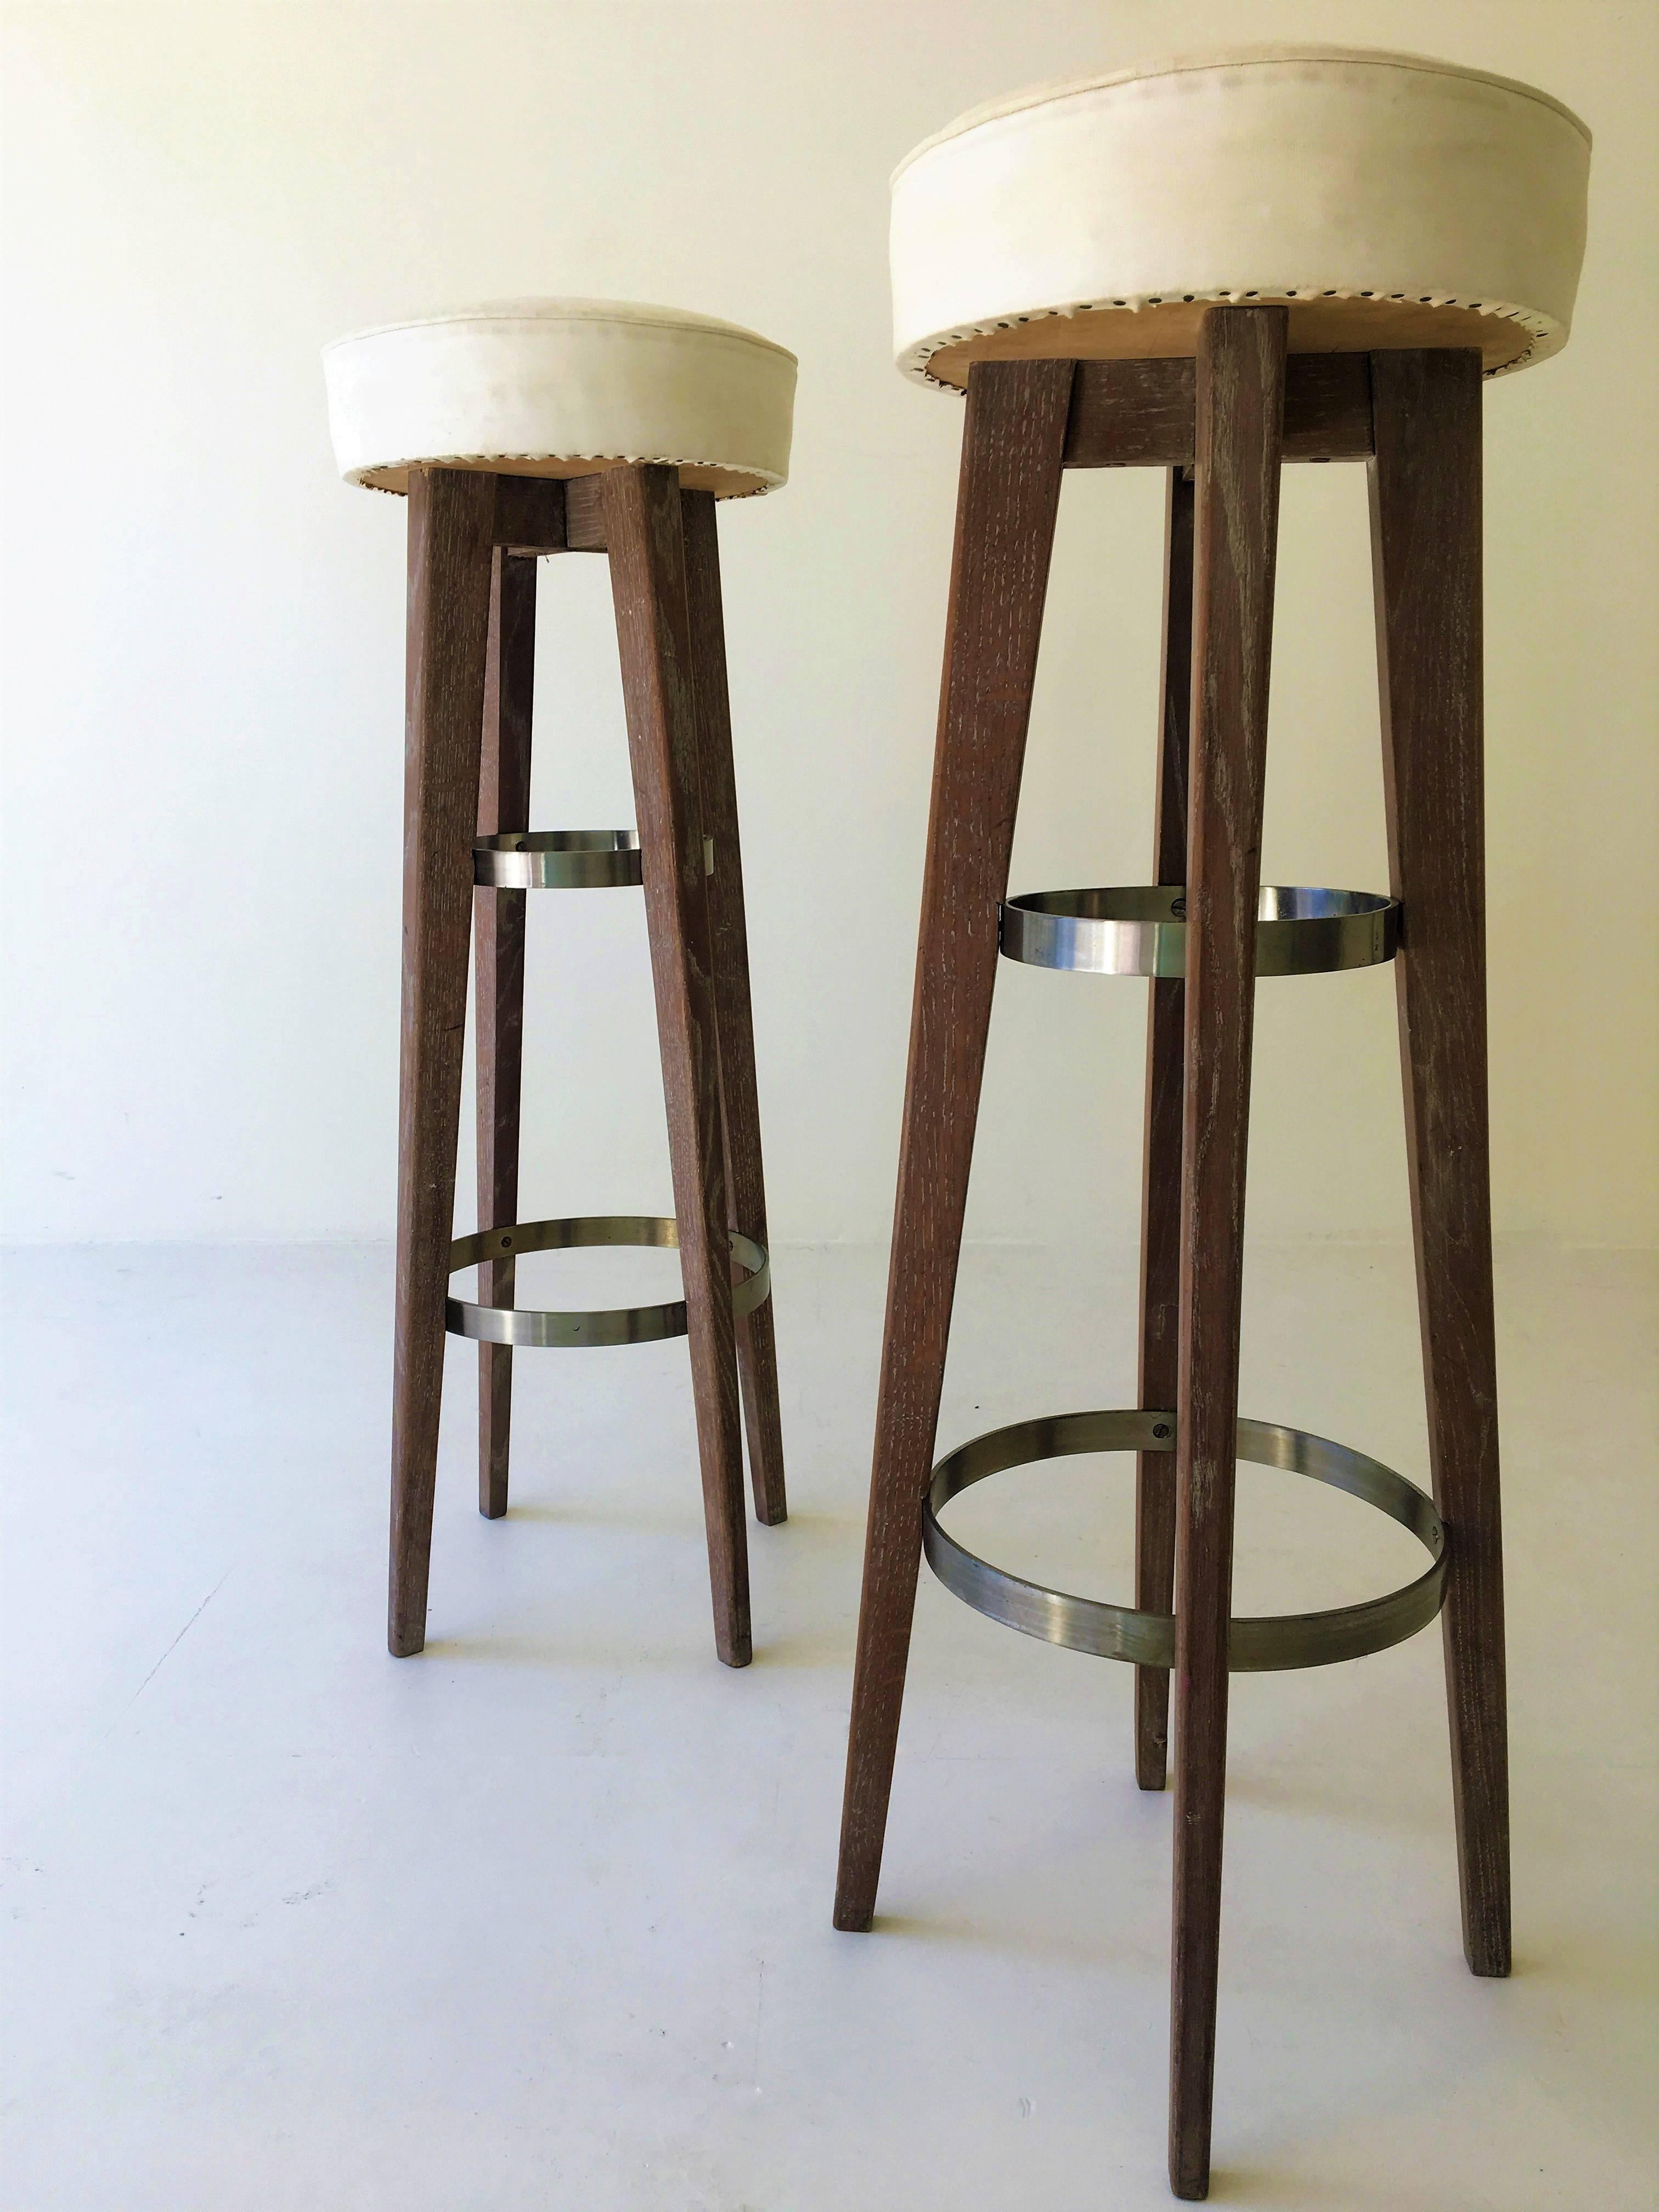 Pair of unique bar stools form the 1950s with their original vinyl cover. Very slim and high design.